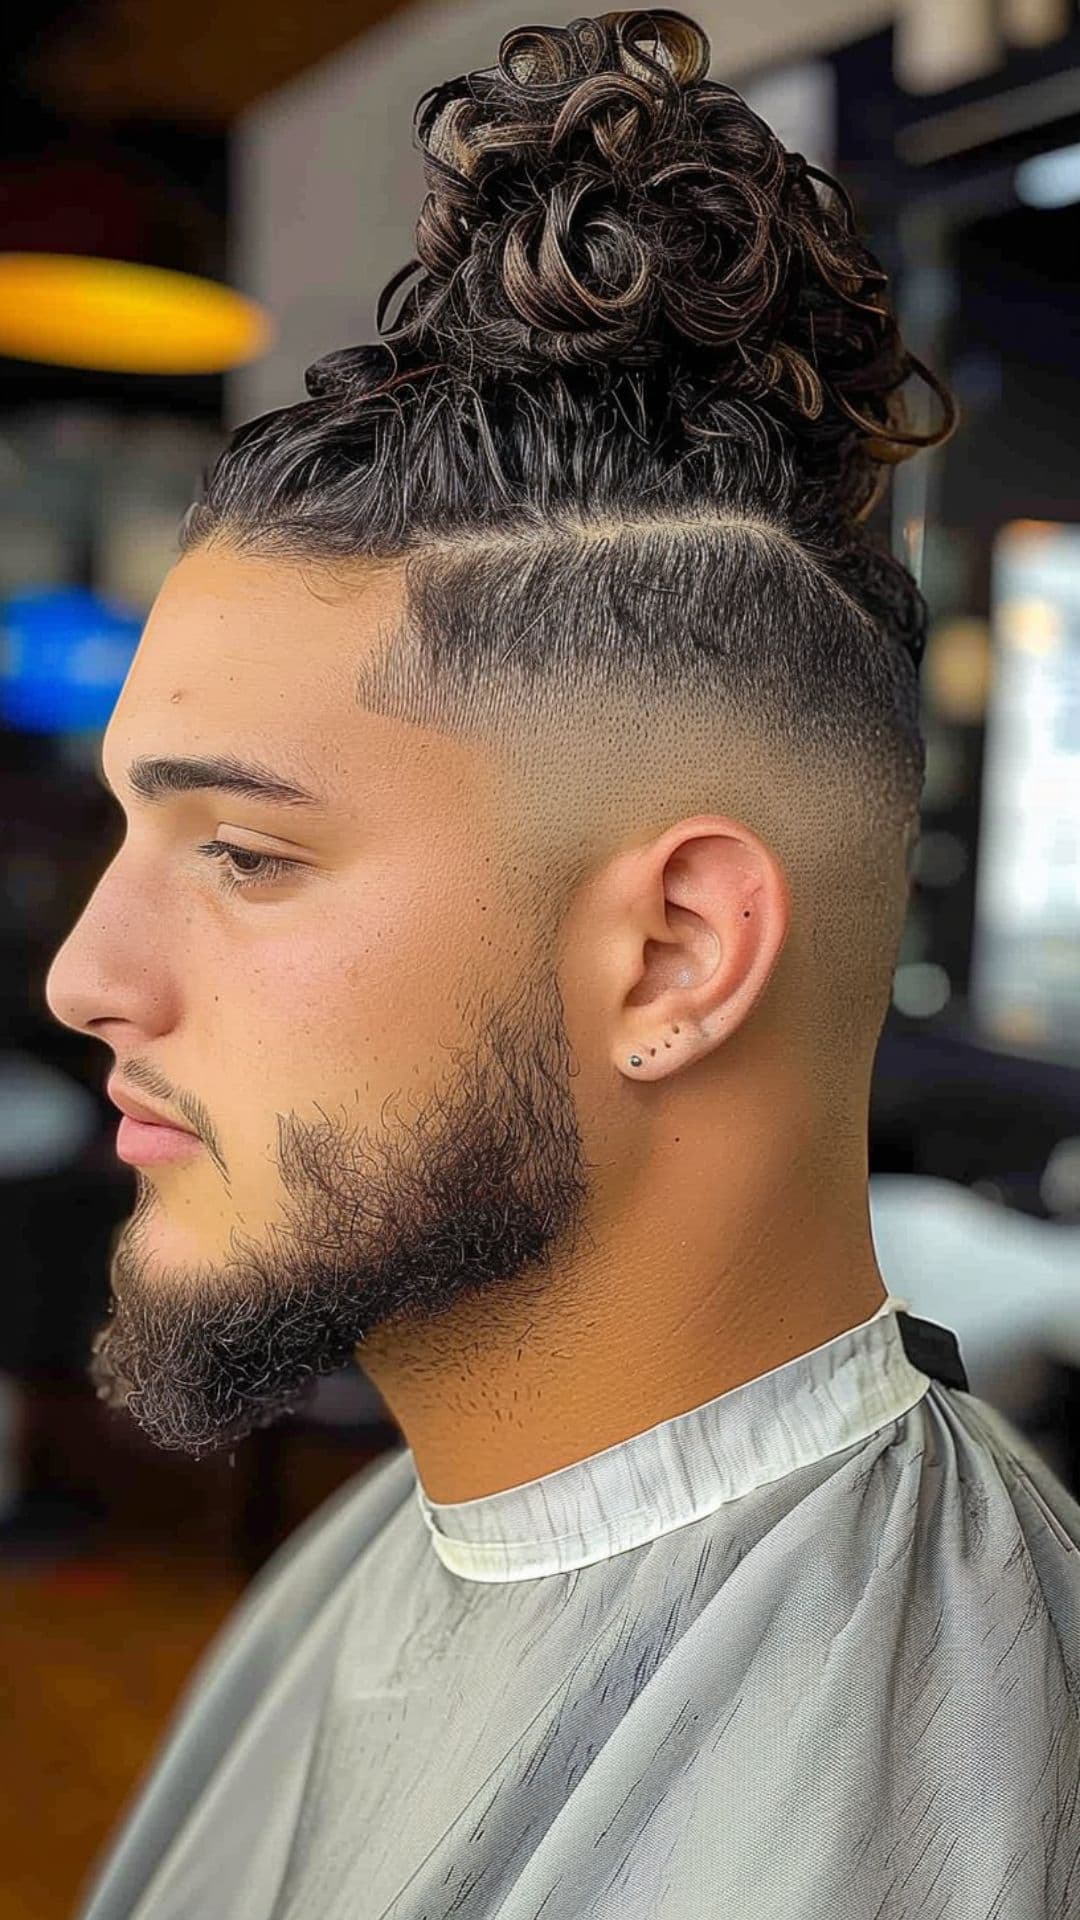 A man modelling a curly man bun hairstyle.